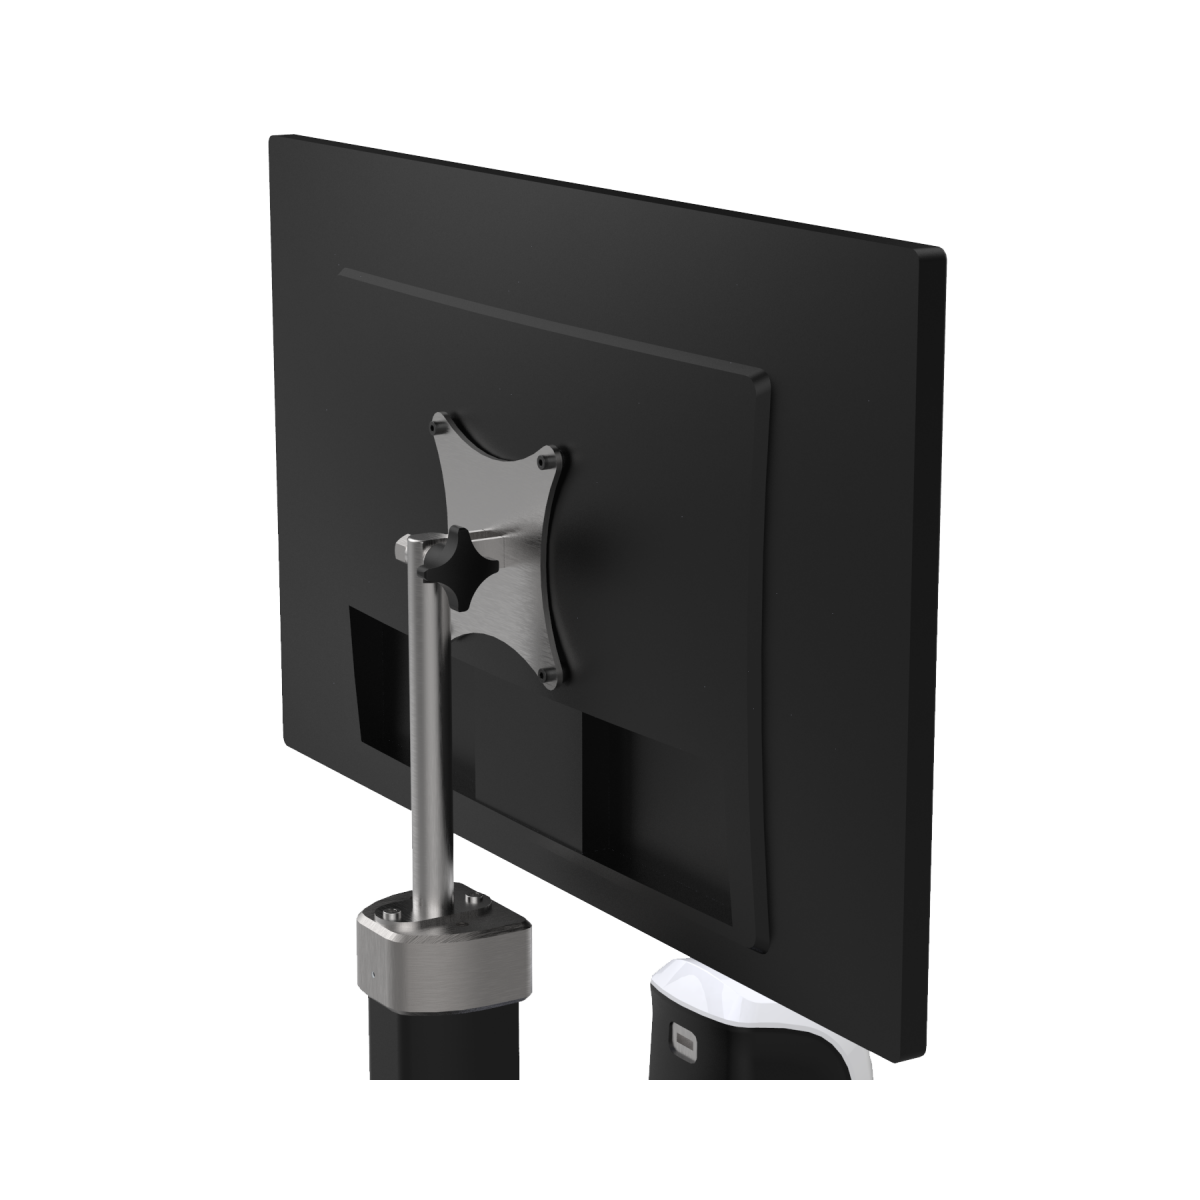 Monitor Mount Adapter shown on top of premium track stand with monitor mount and monitor assembled